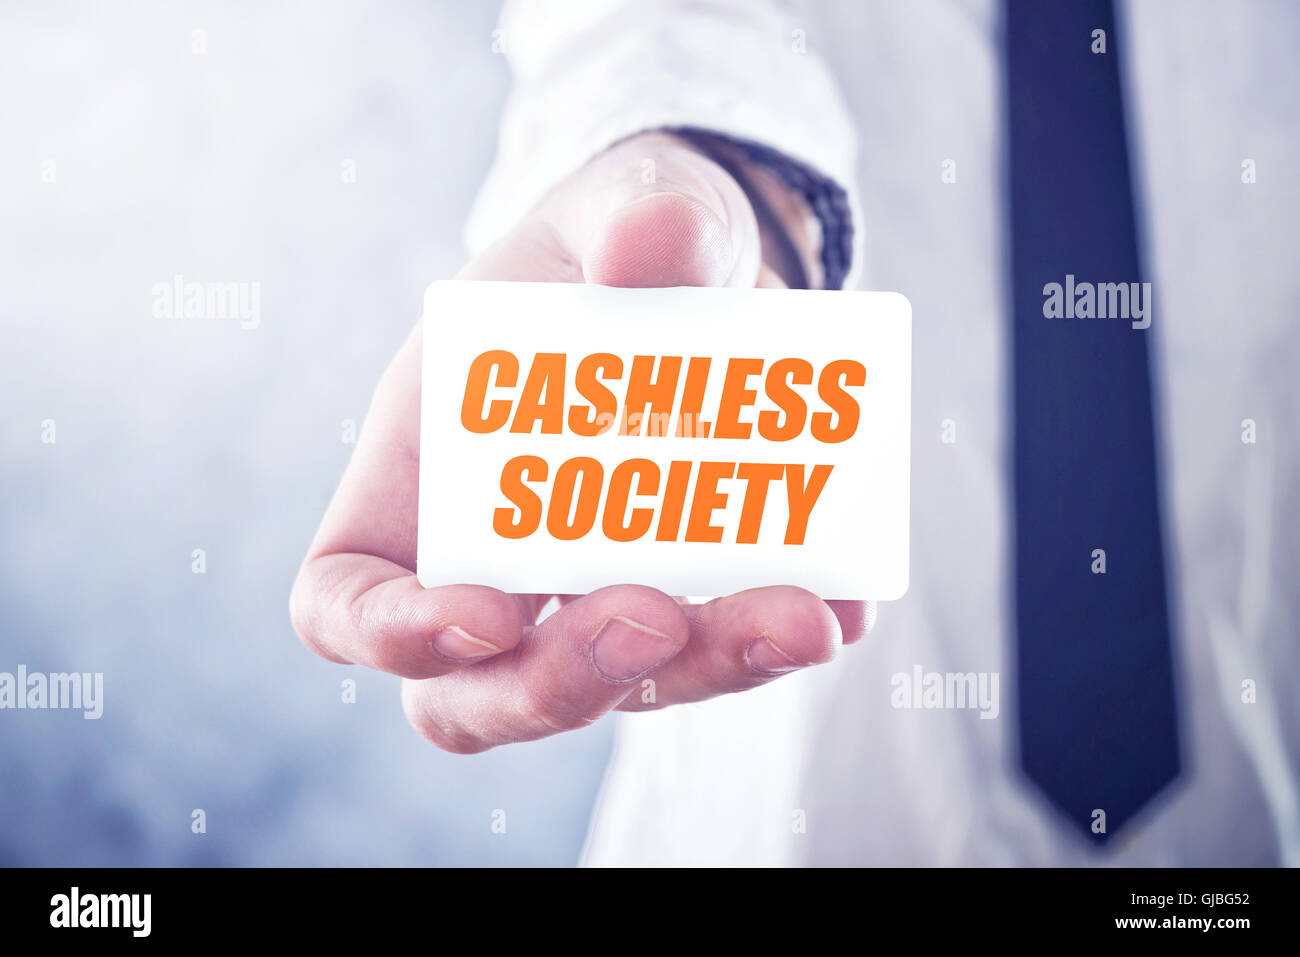 Businessman holding card with Cashless society title, concept of promoting mobile and electronic payments without cash money ban Stock Photo